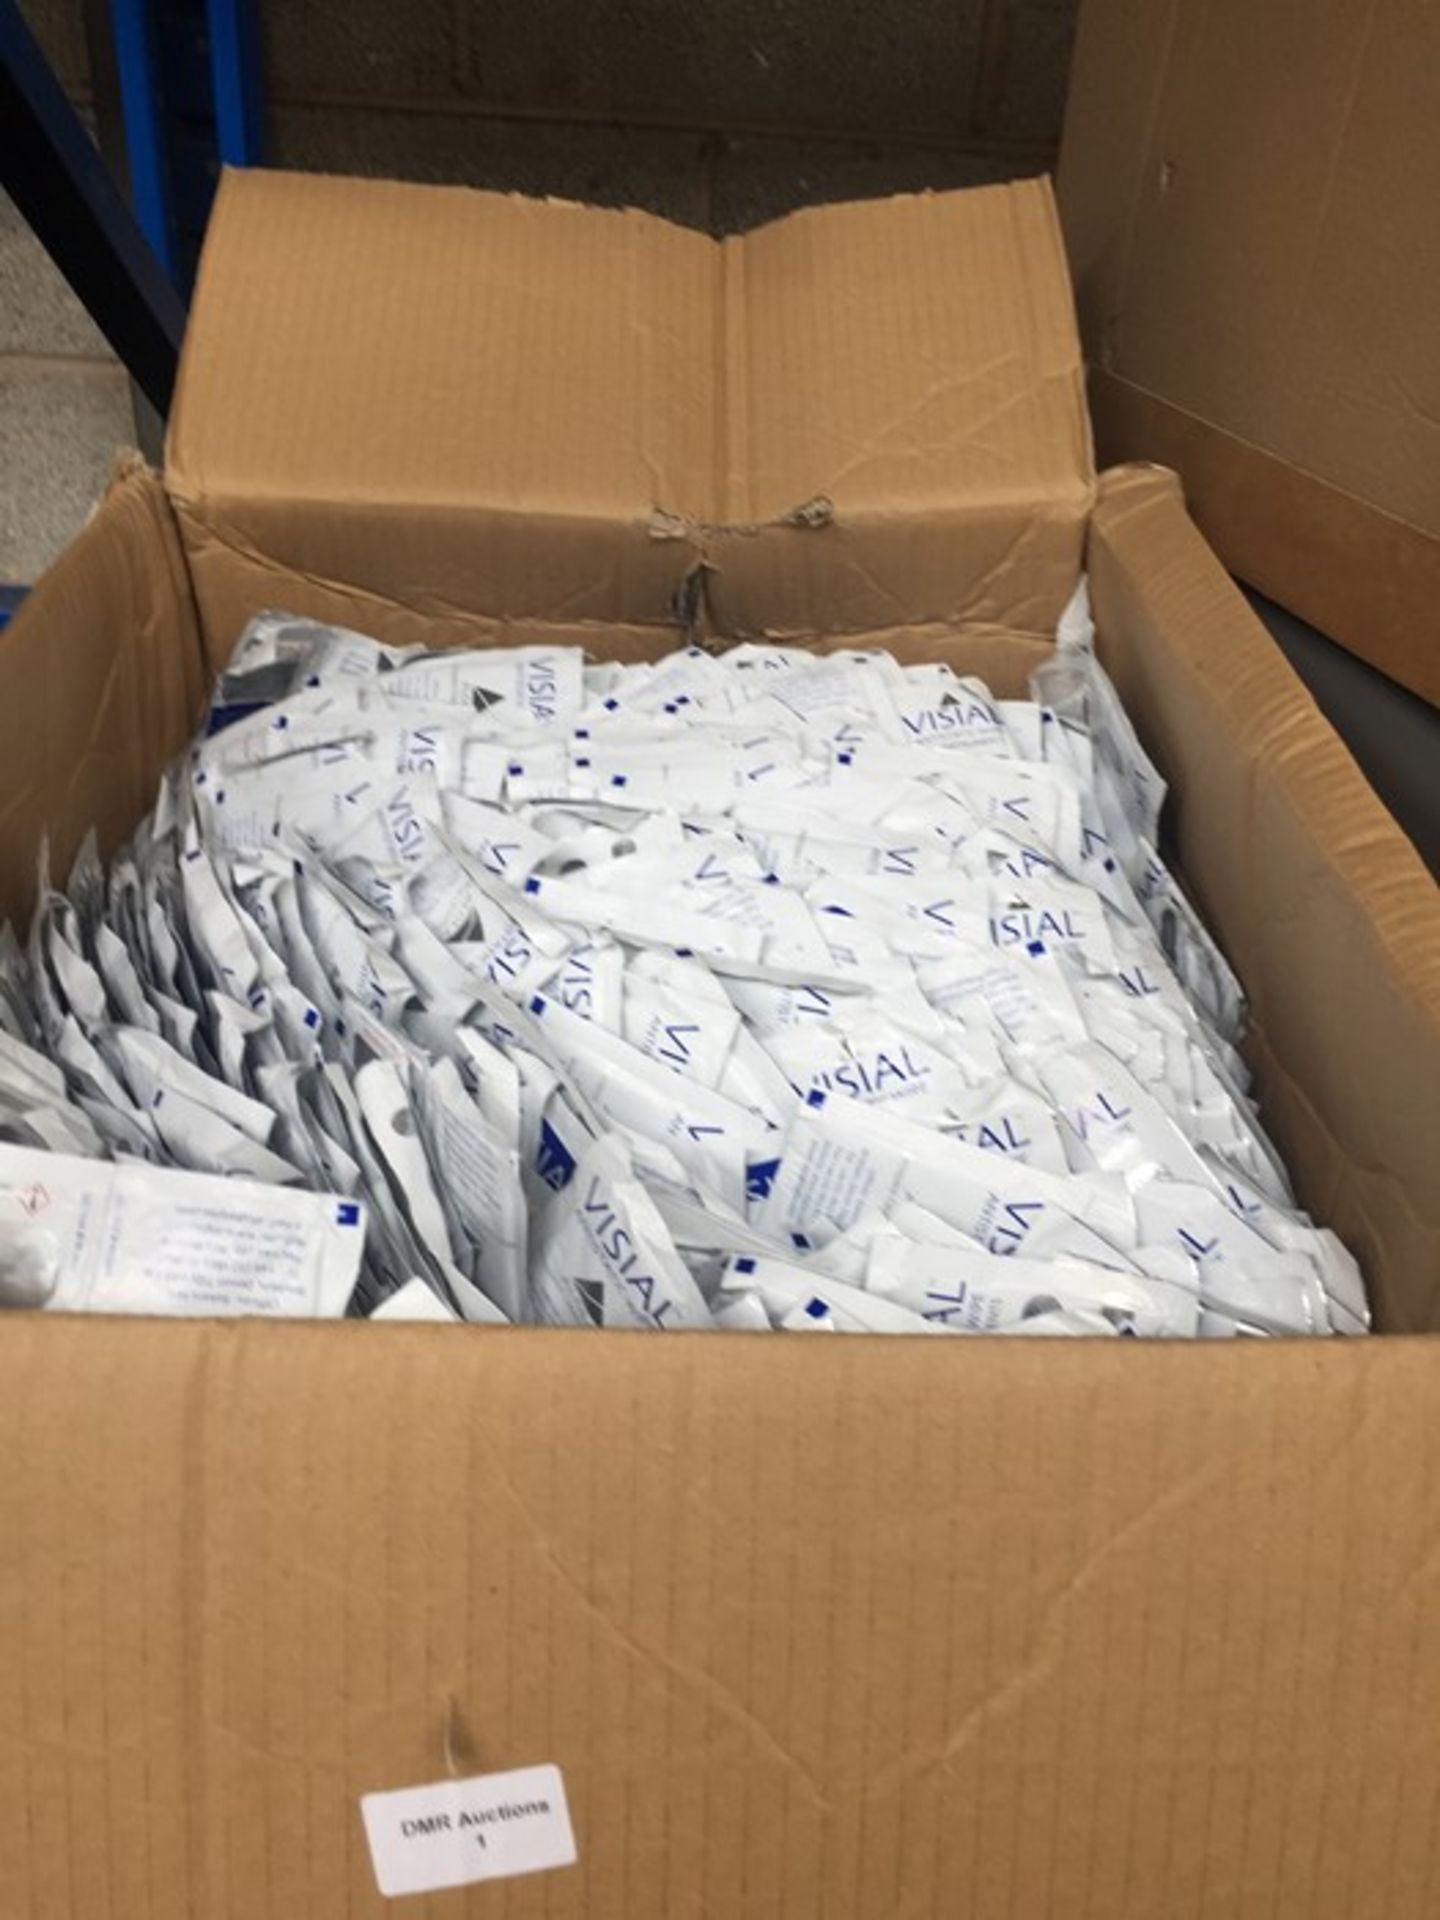 1 LOT TO CONTAIN 1 BOX FULL OF VISIAL ANTI STATIC WIPES APPROX. 1000 PAIRS PACKAGED INDIVIDUALLY